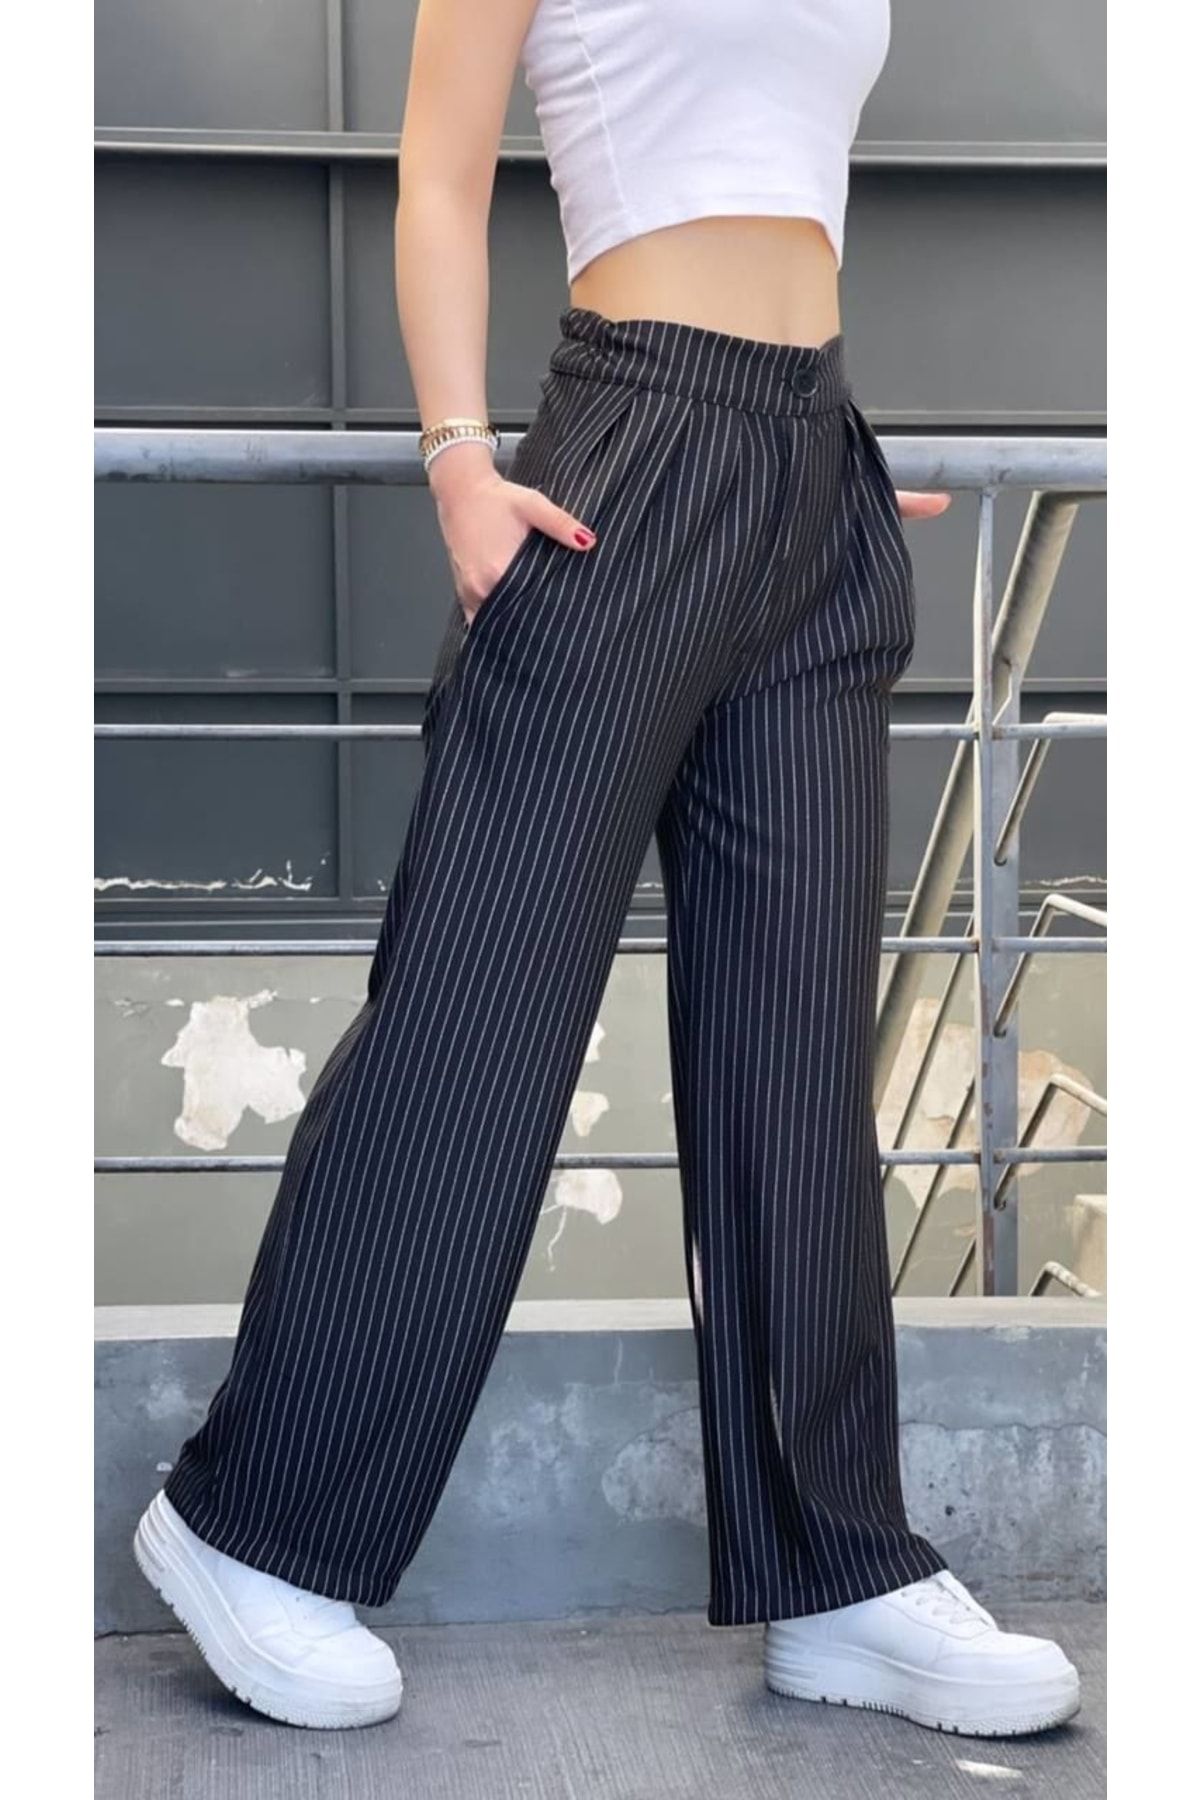 REKA MODA Made of Crepe Fabric, Palazzo Model, Stripe Pattern, Buttons and Elastic  Waist, Women's Trousers - Trendyol